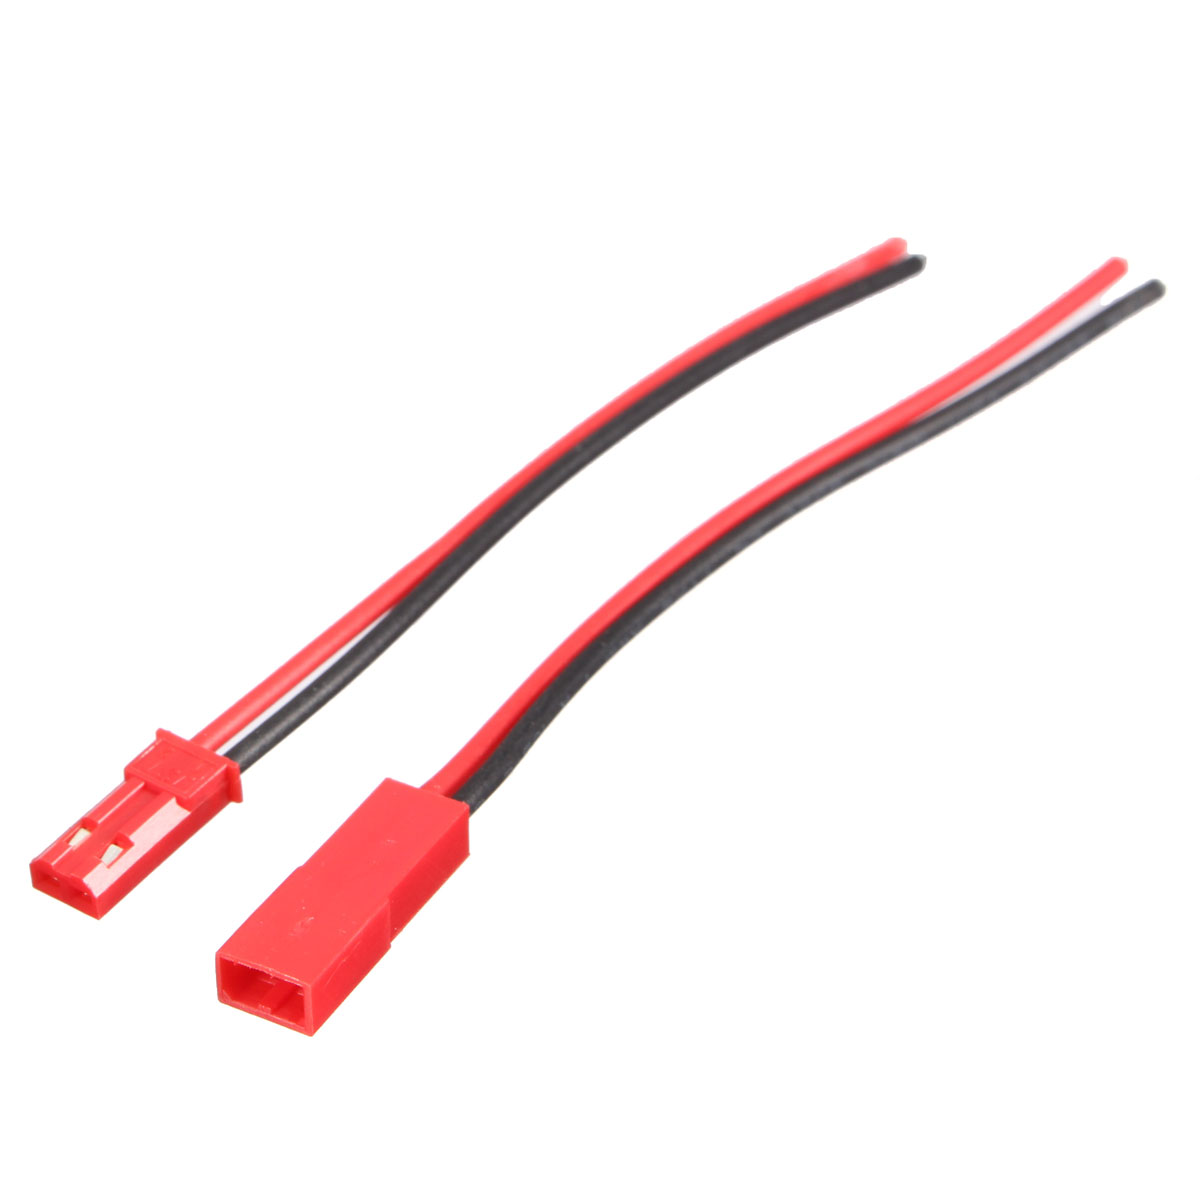 Excellwayreg-10-Pairs-2-Pins-JST-Male--Female-Connectors-Plug-Cable-Wire-Line-110mm-Red-1268119-4